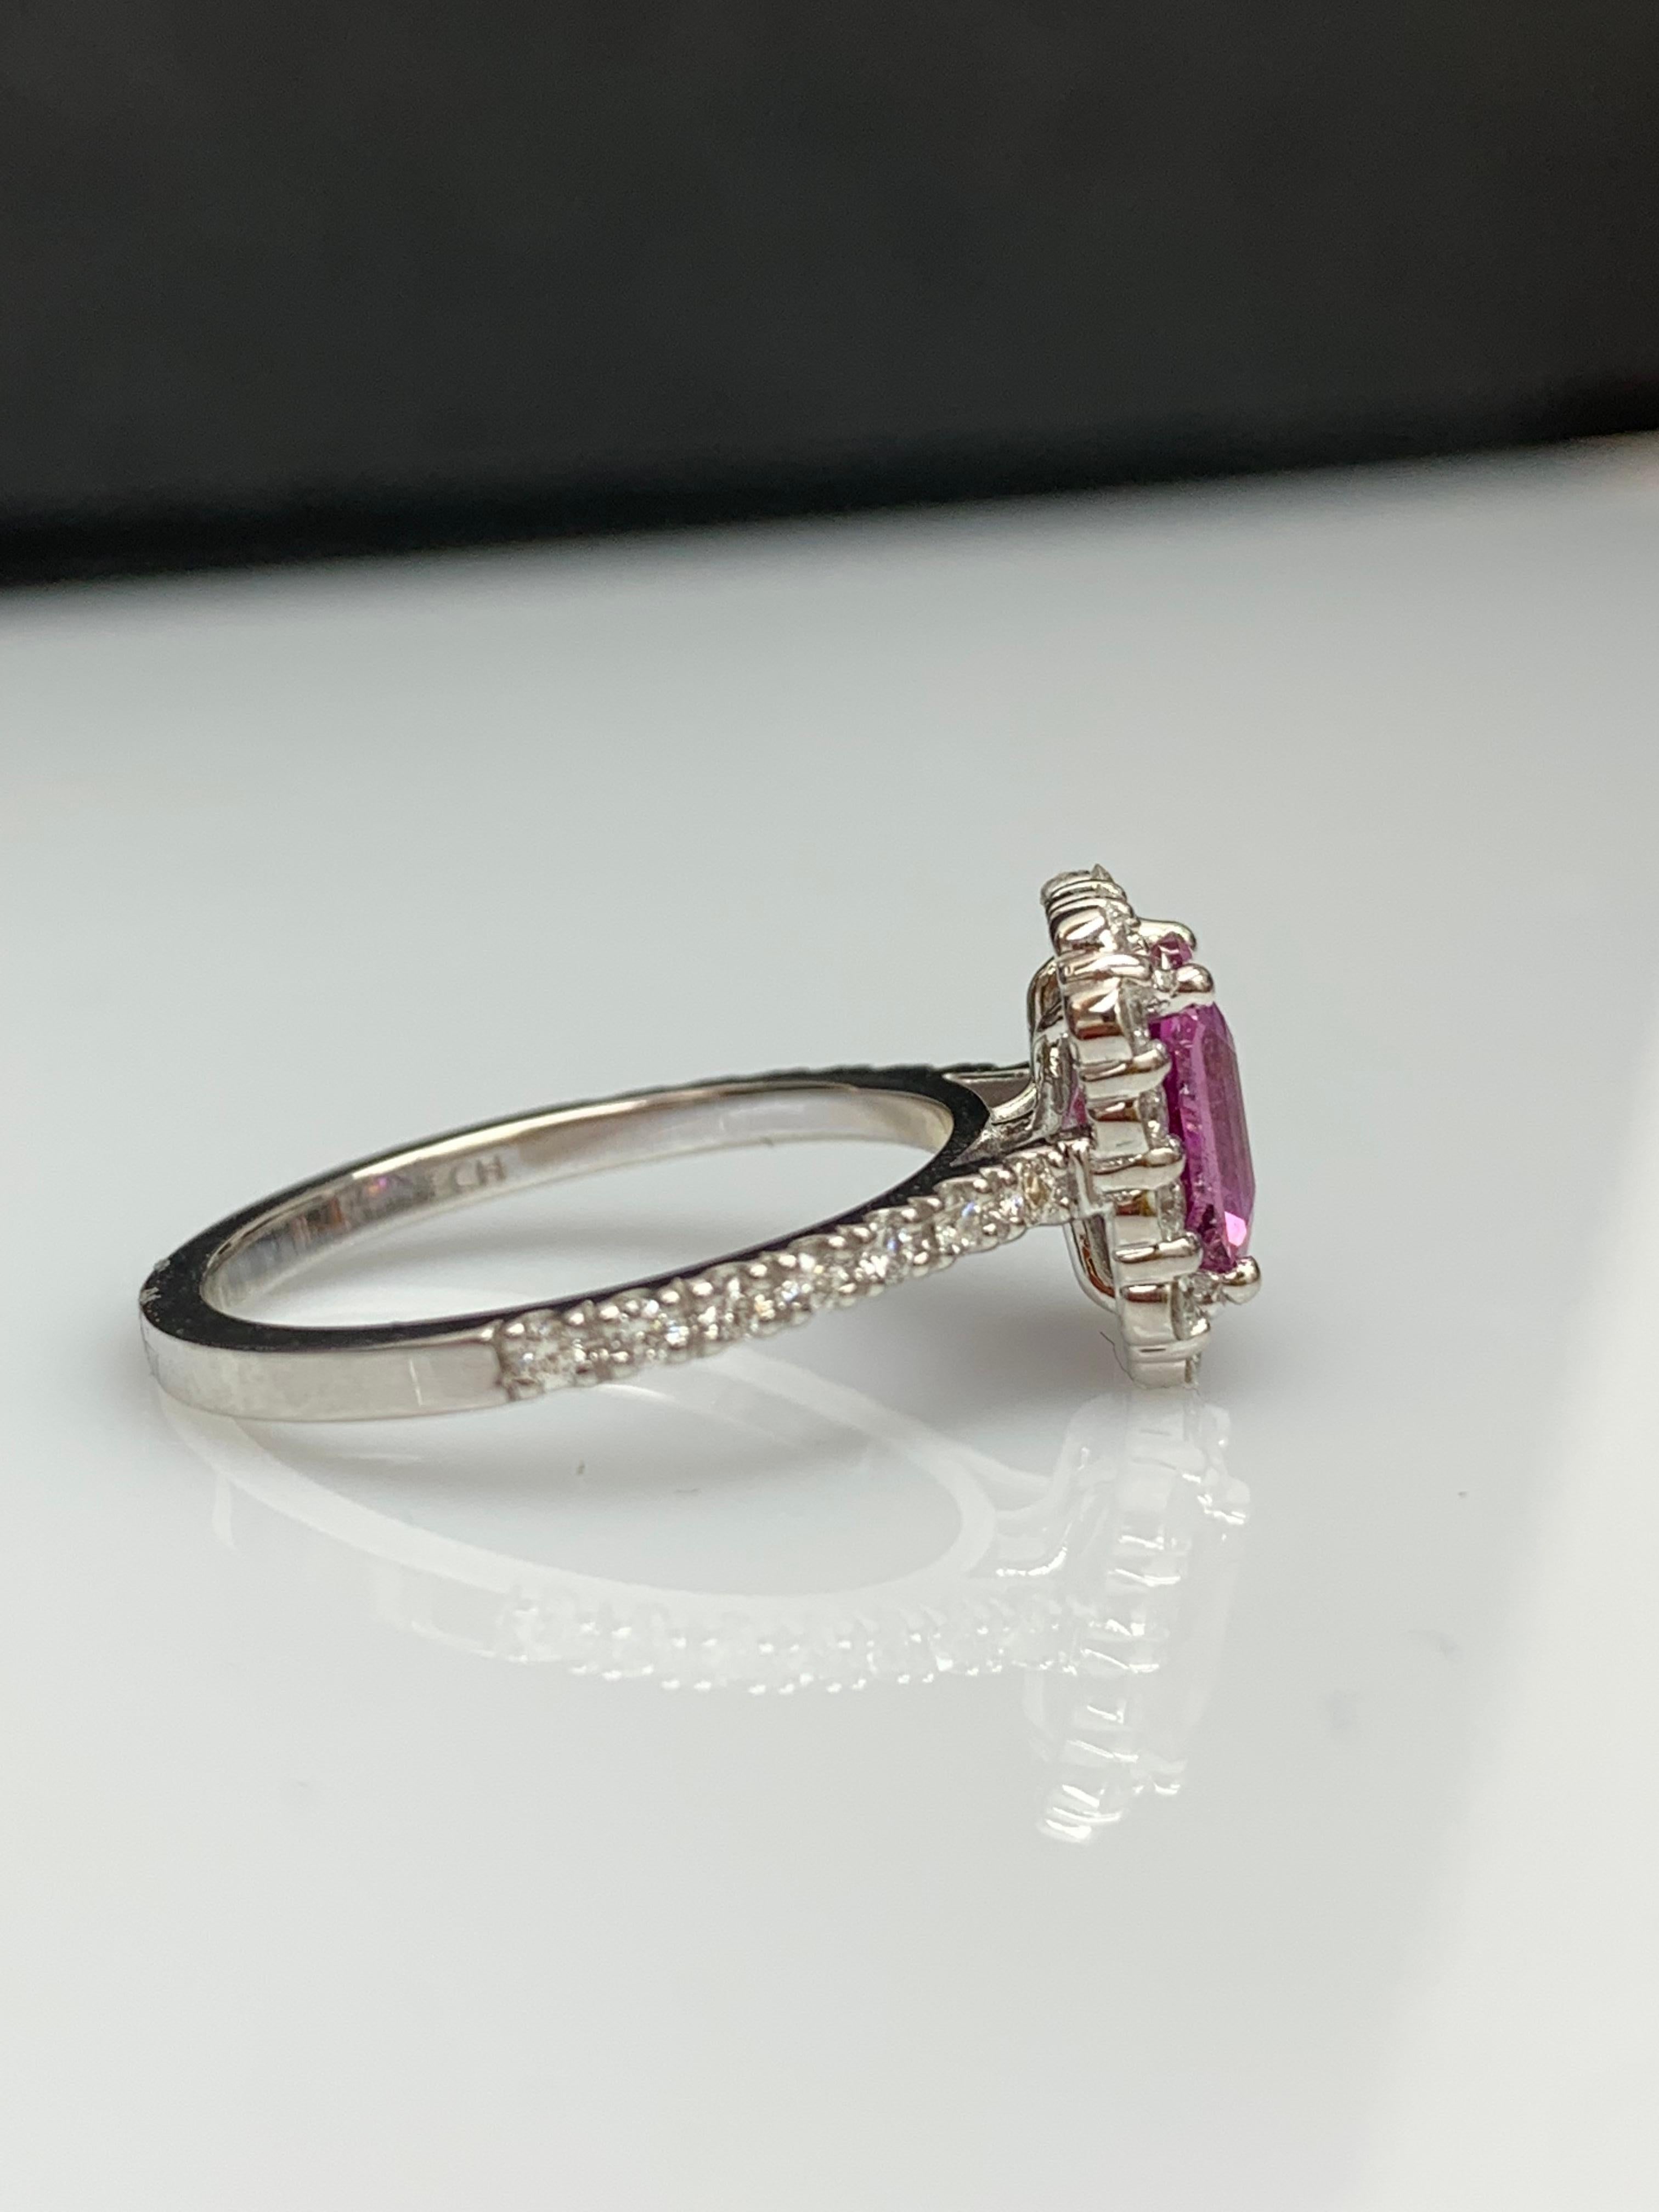 1.59 Carat Emerald Cut Pink Sapphire Diamond Engagement Ring in 14K White Gold For Sale 7